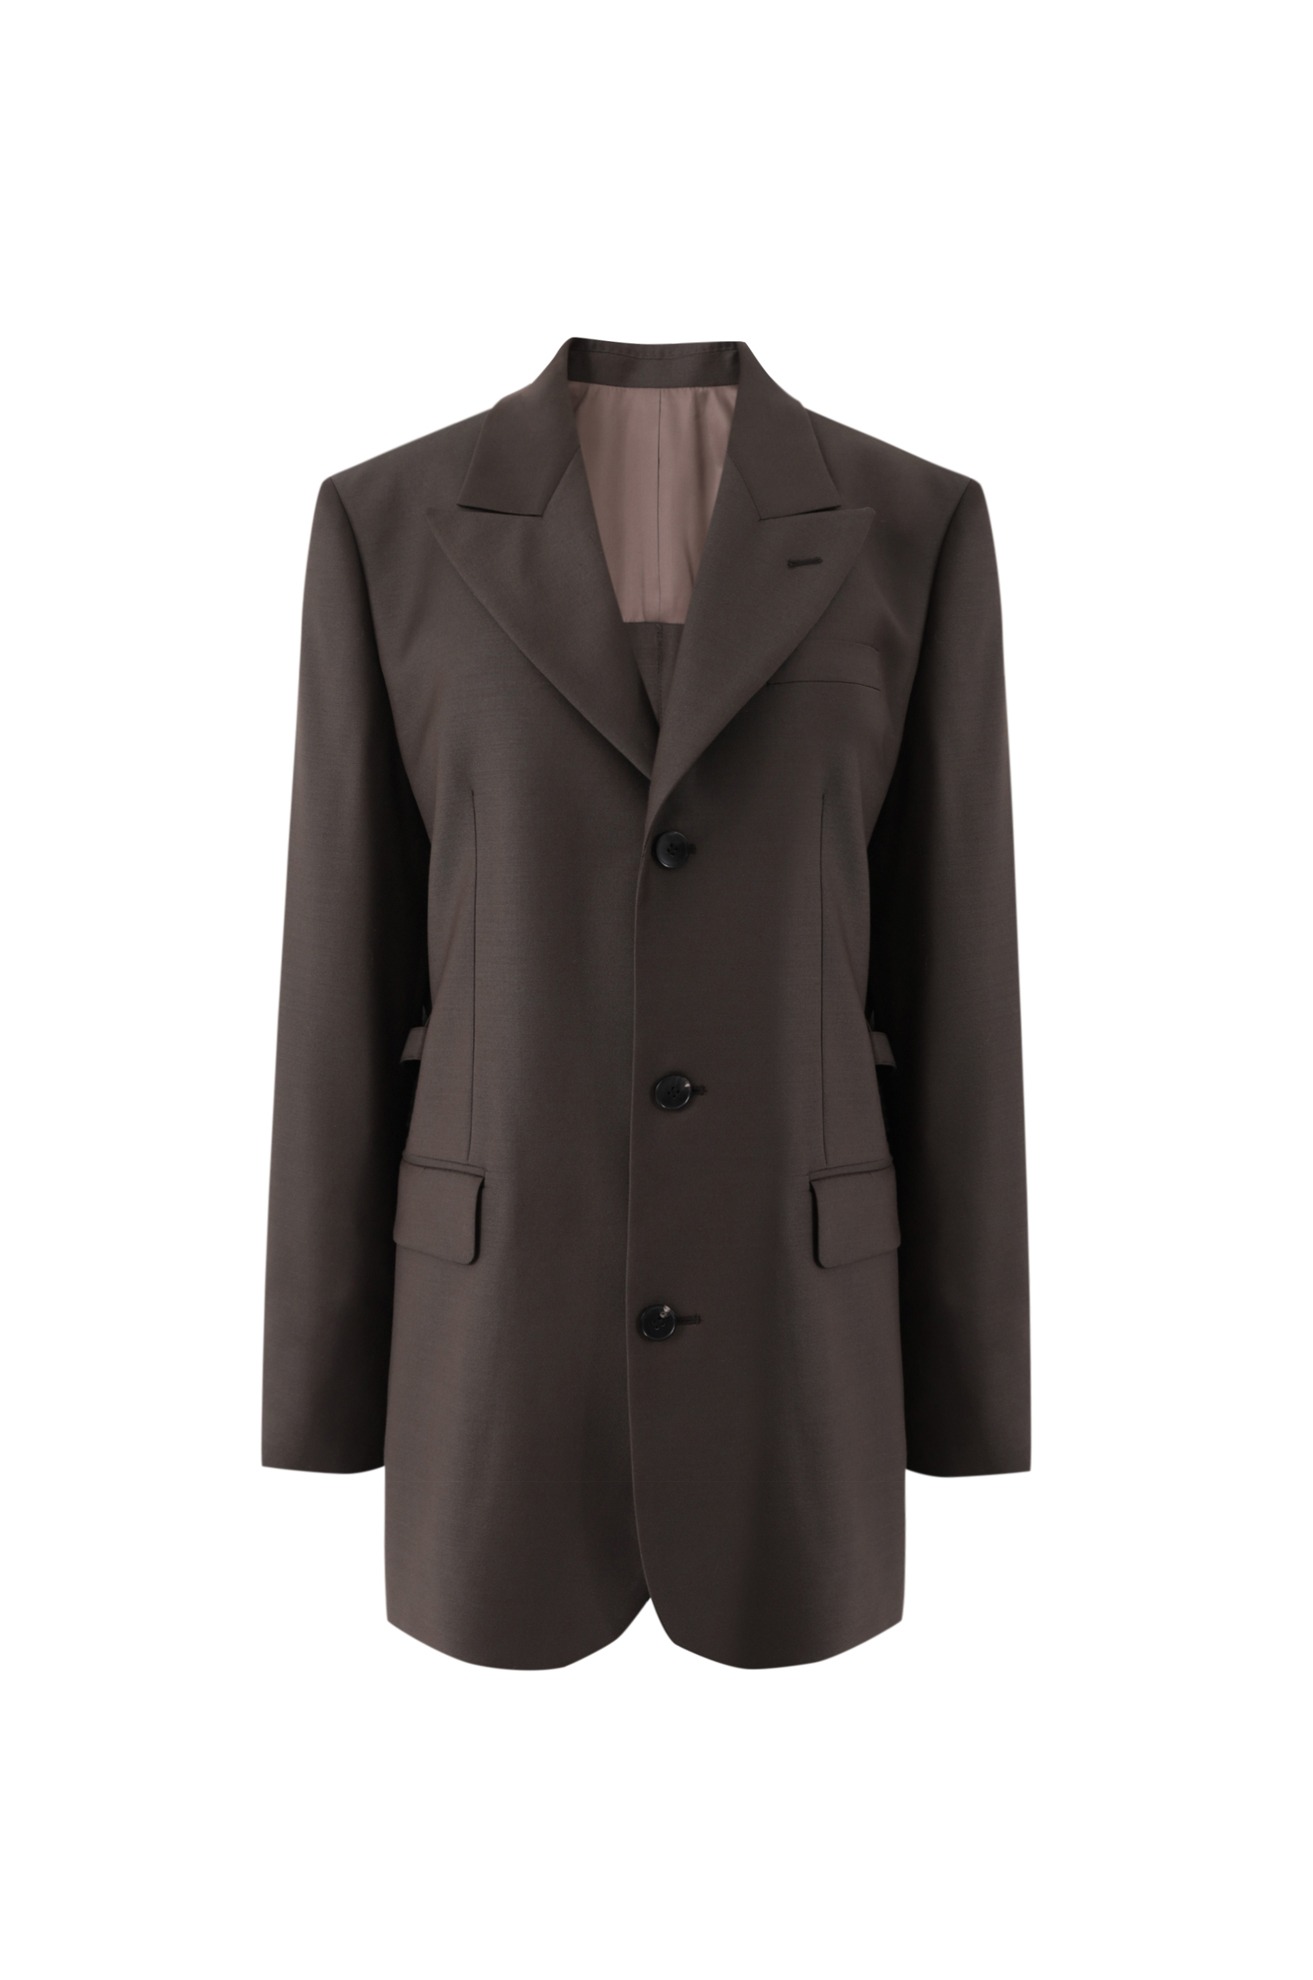 Three Button Blazer with Straps at Slitted Back (BROWN)